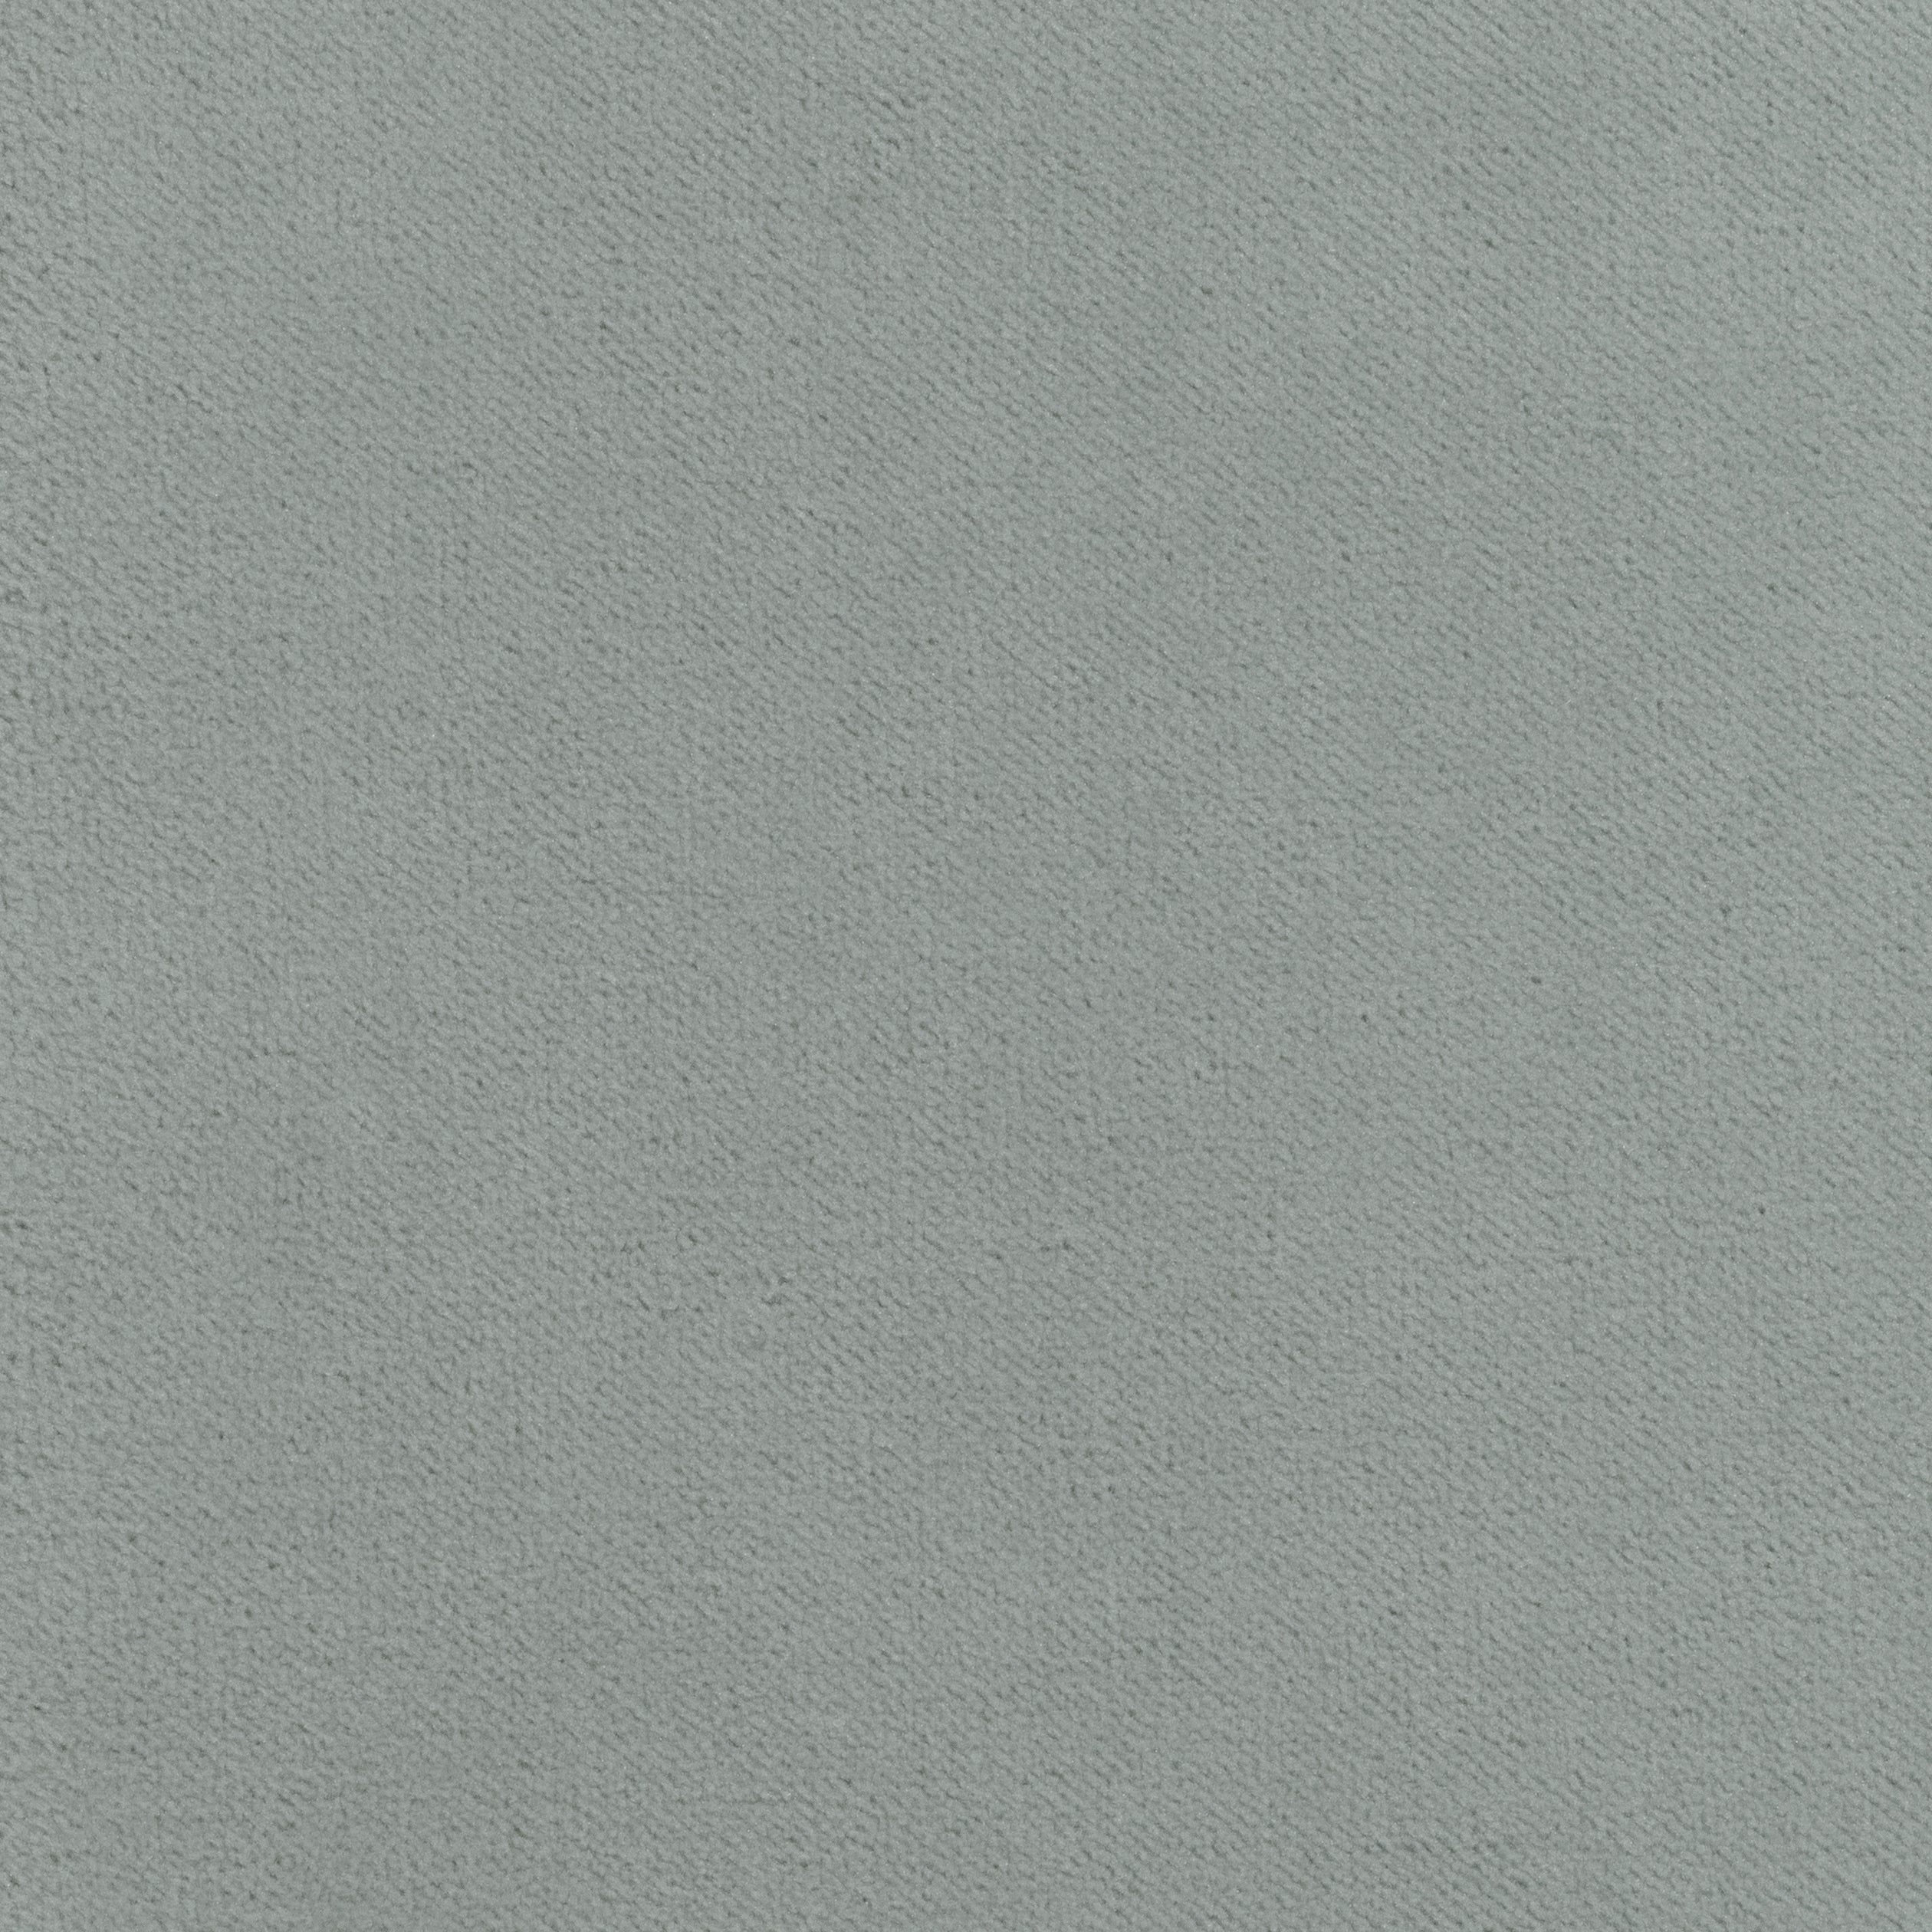 Club Velvet fabric in fog color - pattern number W7261 - by Thibaut in the Club Velvet collection